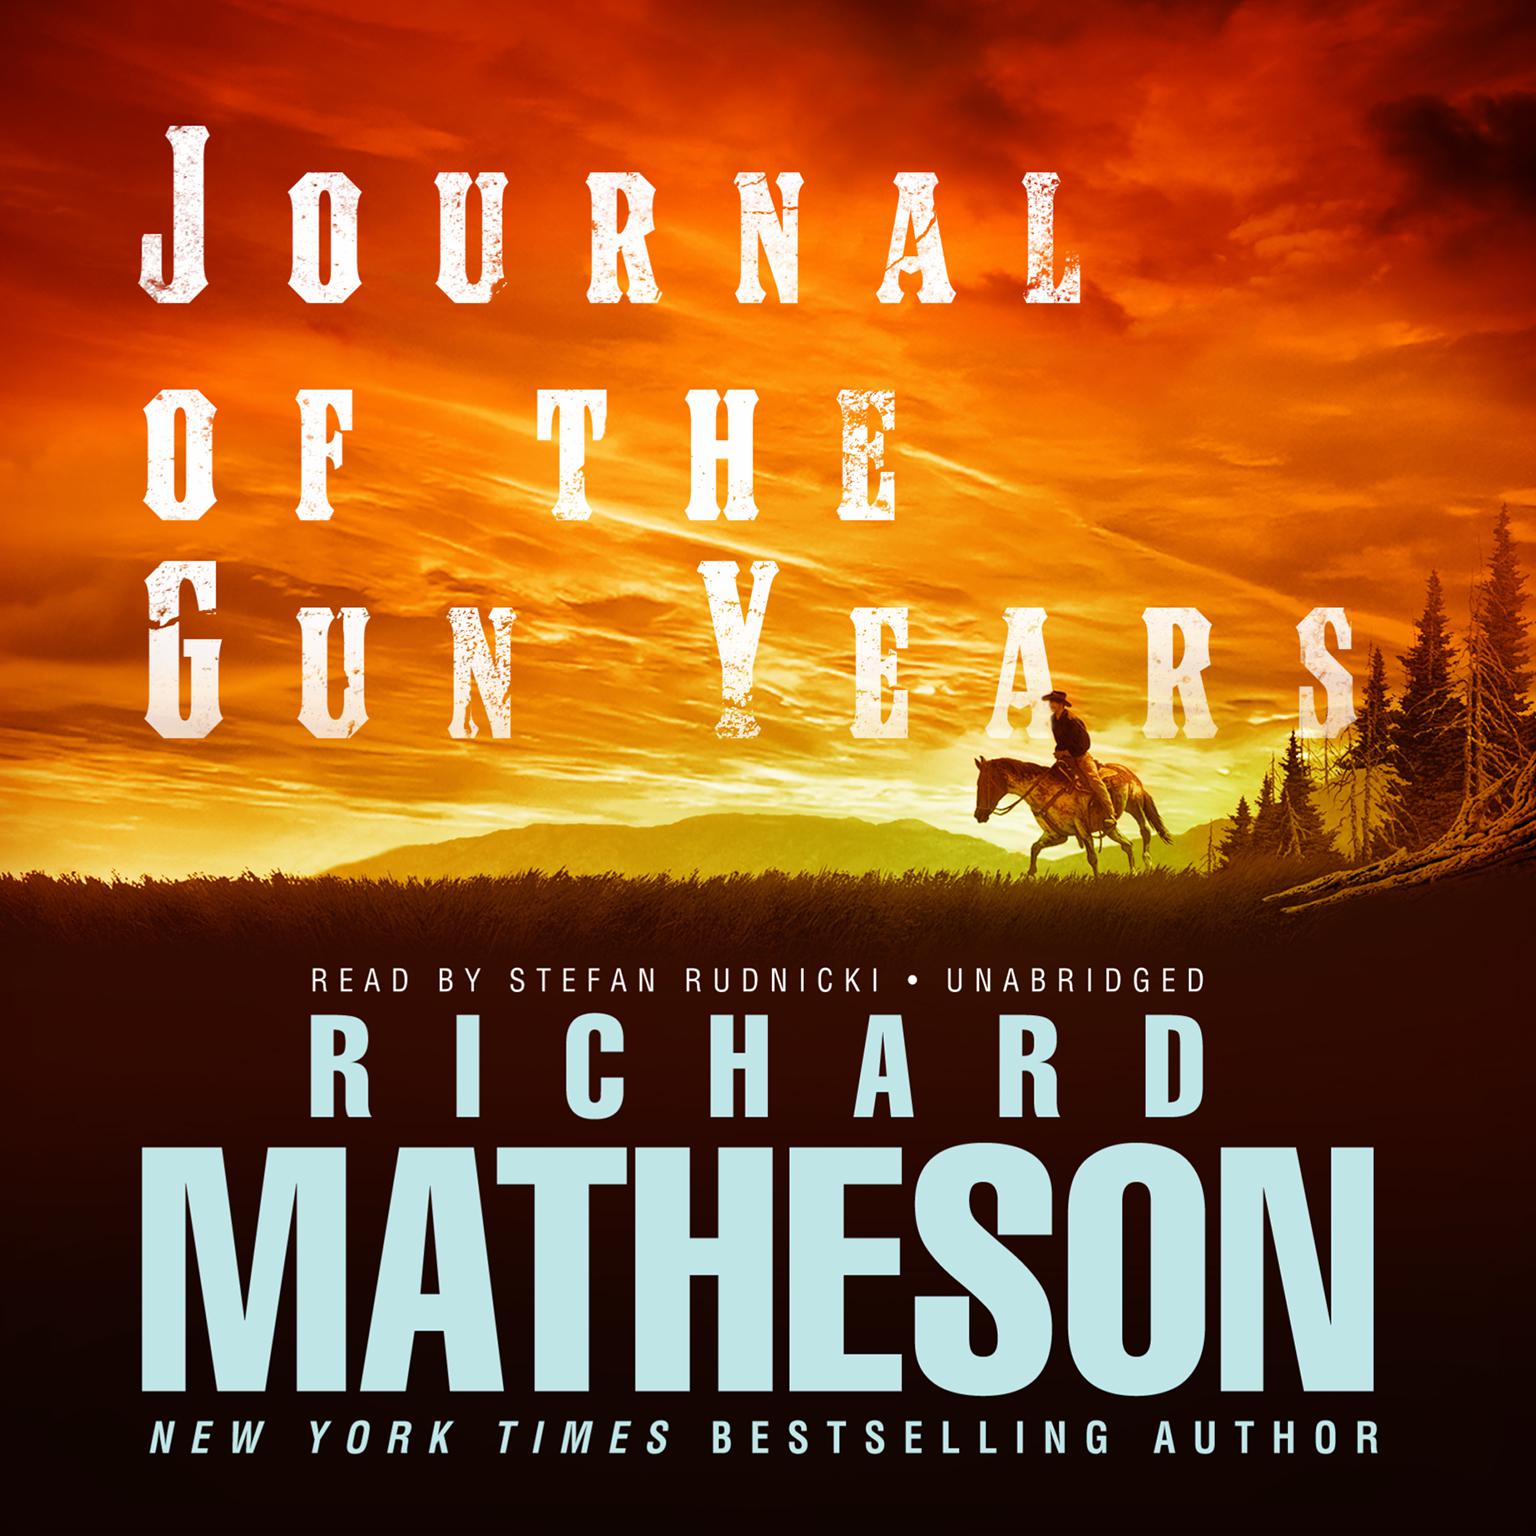 Journal of the Gun Years Audiobook, by Richard Matheson